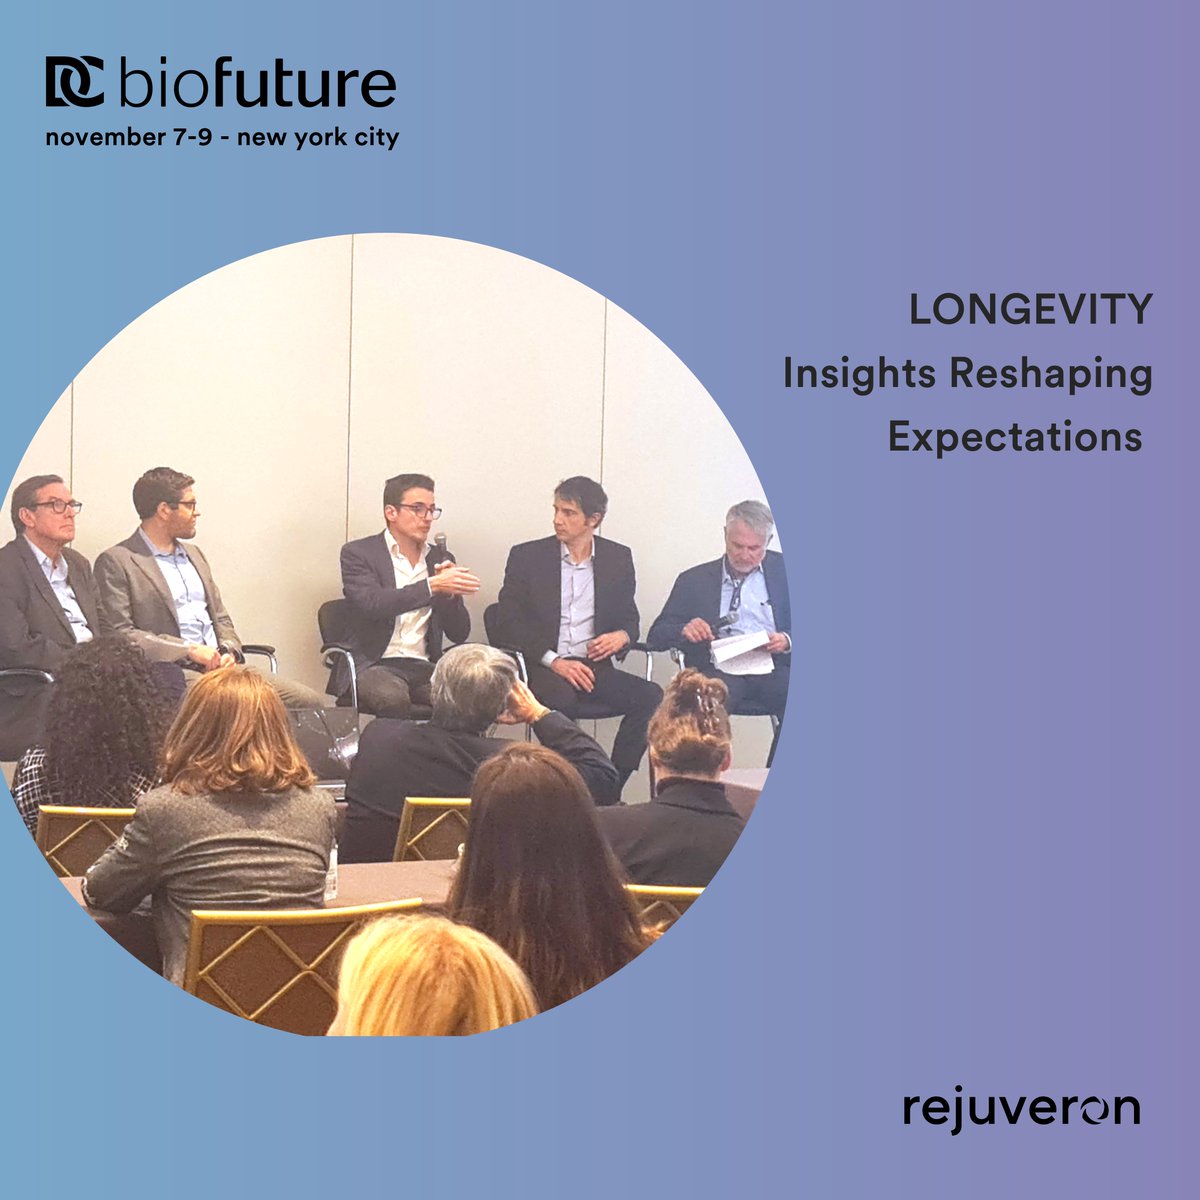 Our Head, Corporate Finance & Investor Relations, @mudry_pierre, shared exciting perspectives on #longevity during yesterday’s panel “Insights Reshaping Expectations” at #BioFuture. Thank you to the remarkable lineup of panelists for the lively discussion!